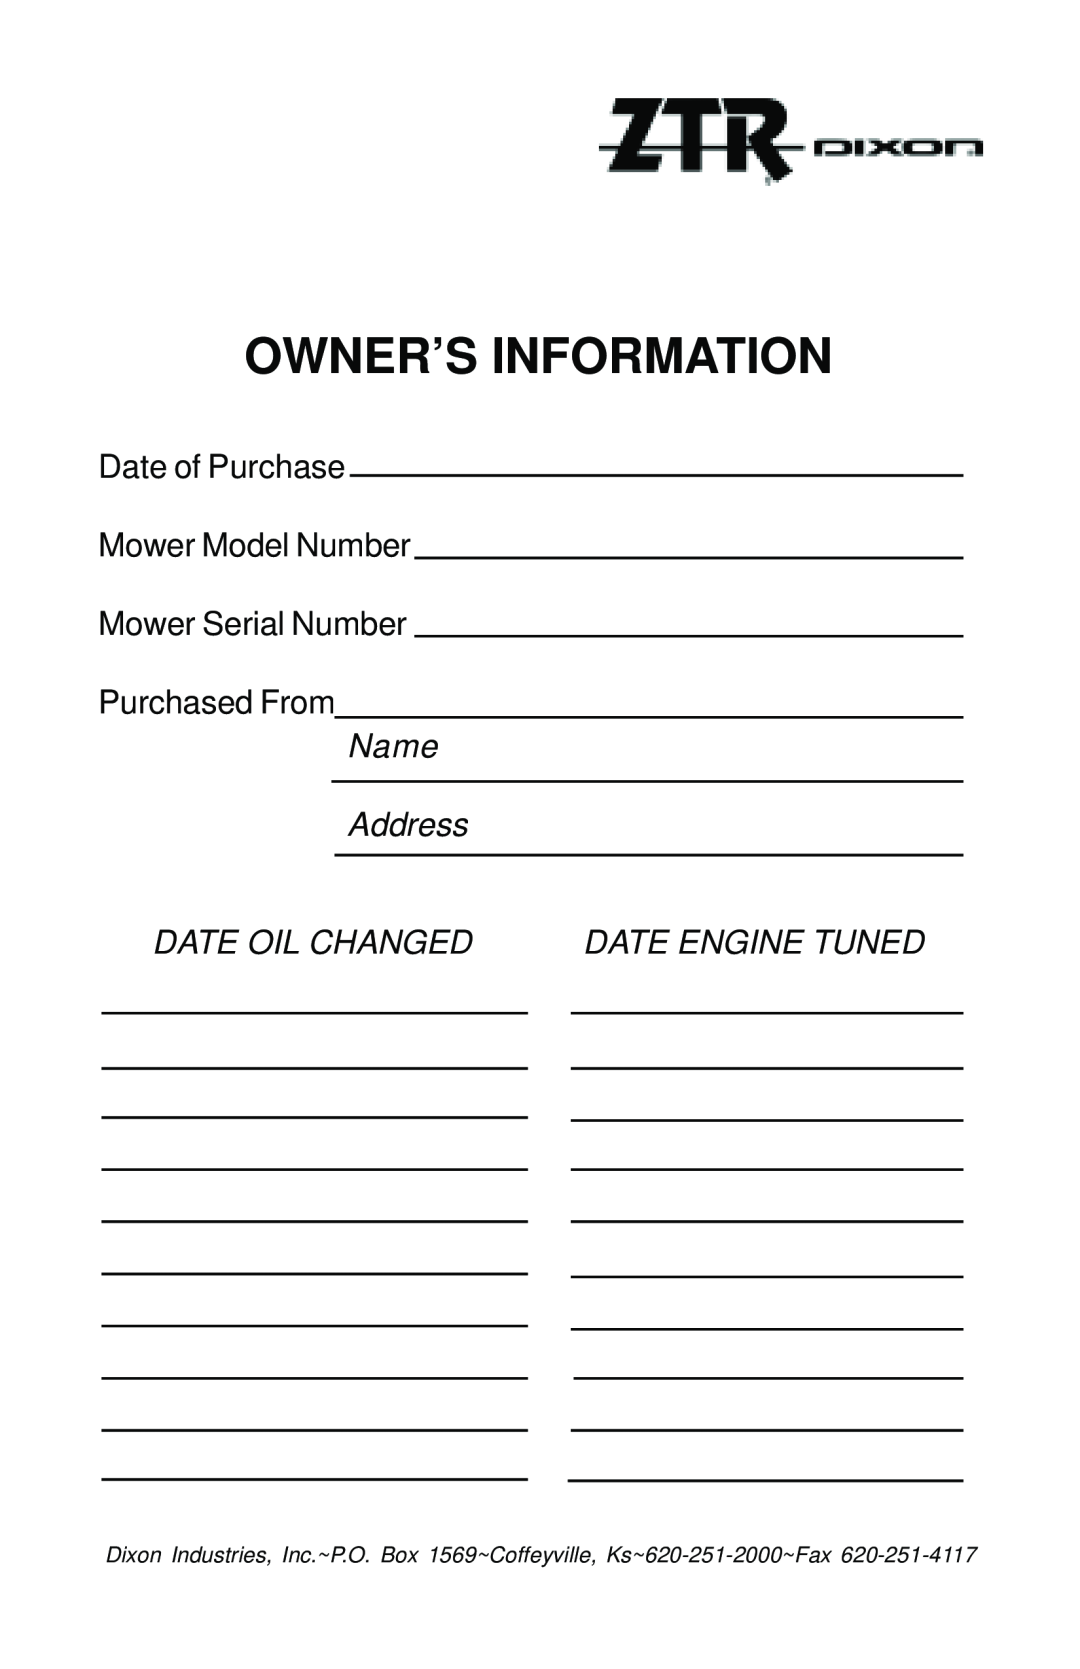 Dixon 17823-0704 manual Owner’S Information, Date of Purchase Mower Model Number, Mower Serial Number Purchased From 